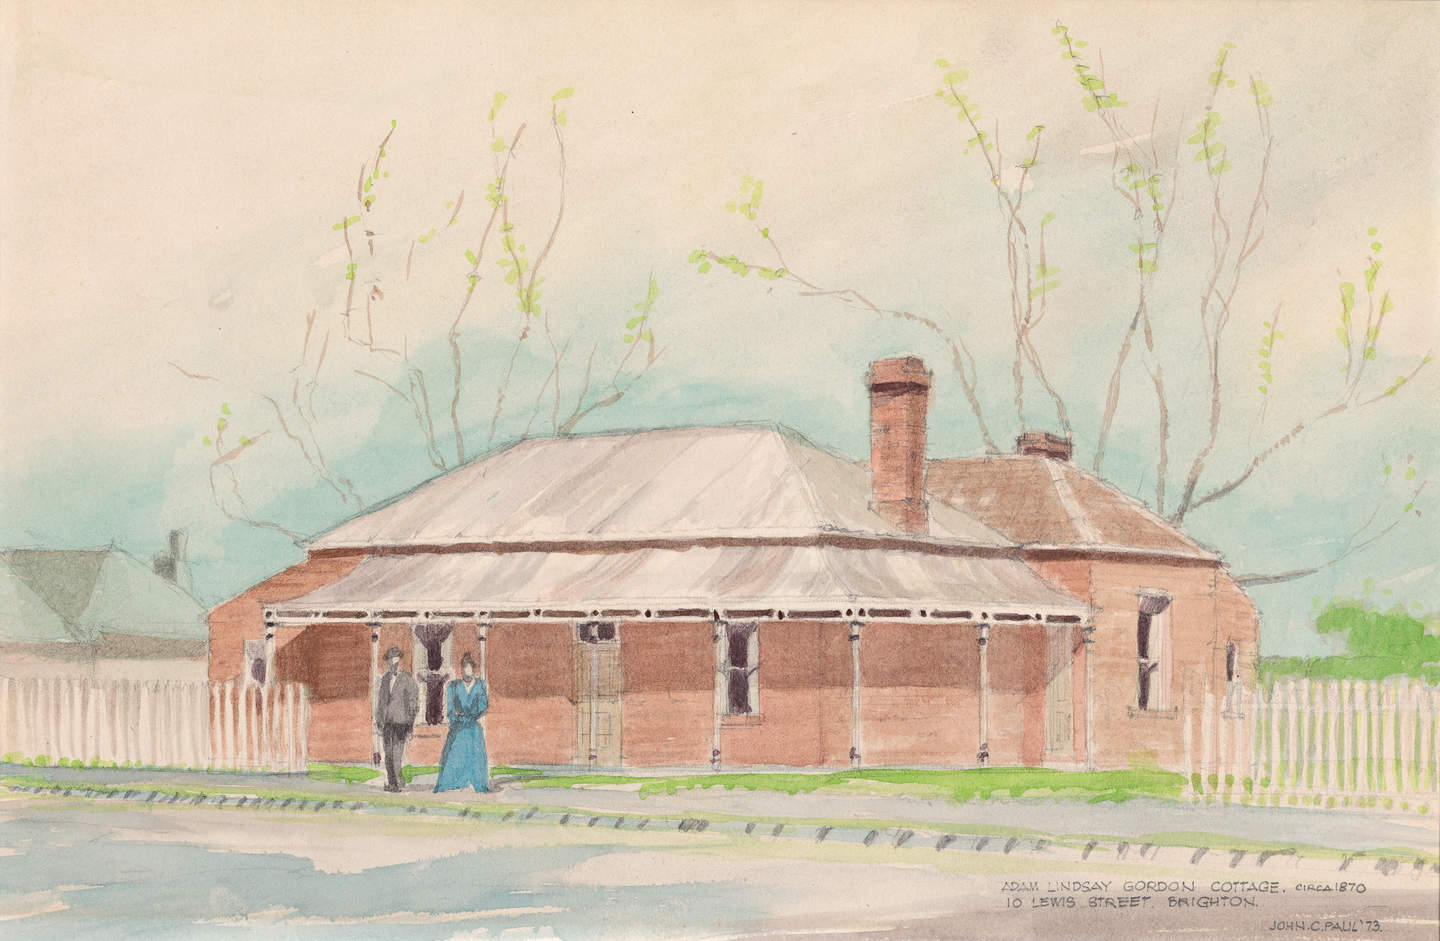 Watercolour of a single story brick house with verandah at the front and surrounding white picket fence. Two figures in 19th century clothing stand in front of the building.